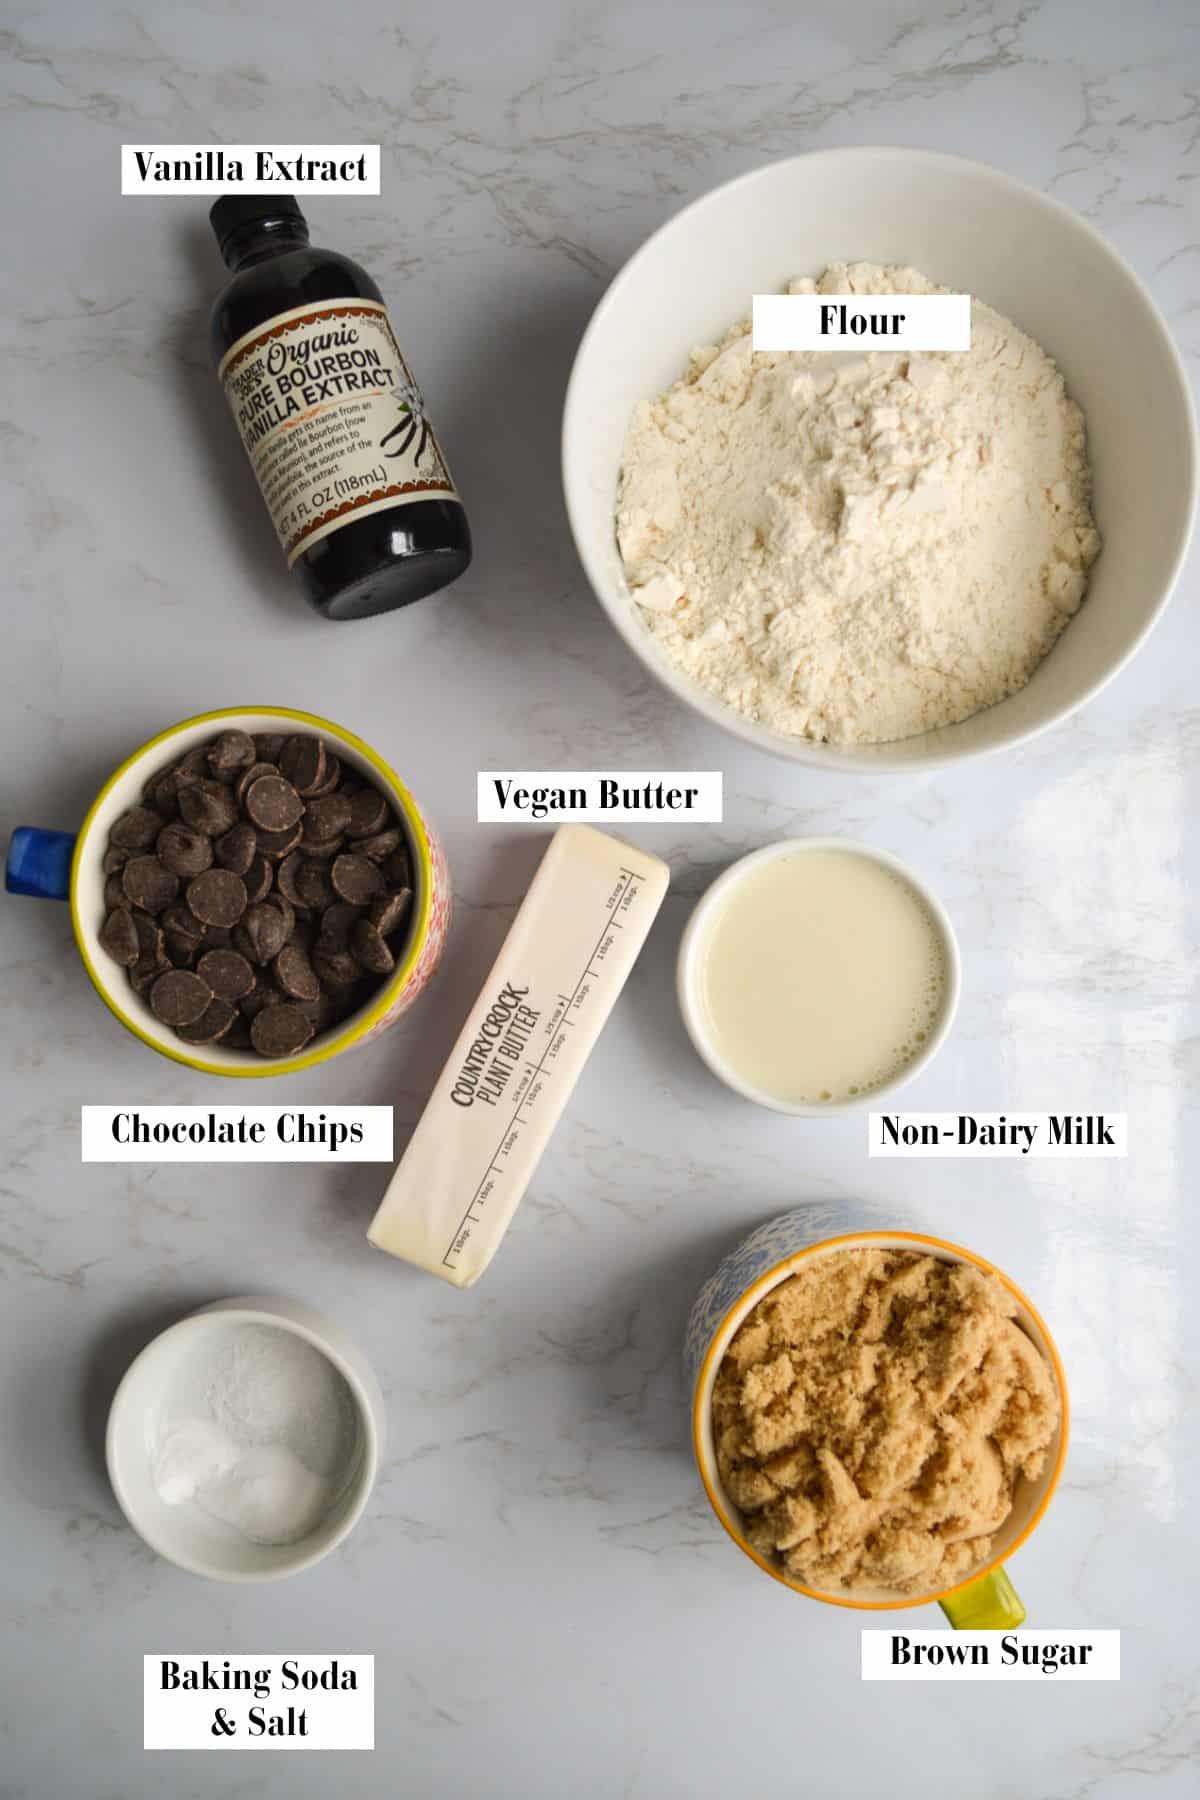 Ingredients needed to make this recipe in small bowls on a marble surface.